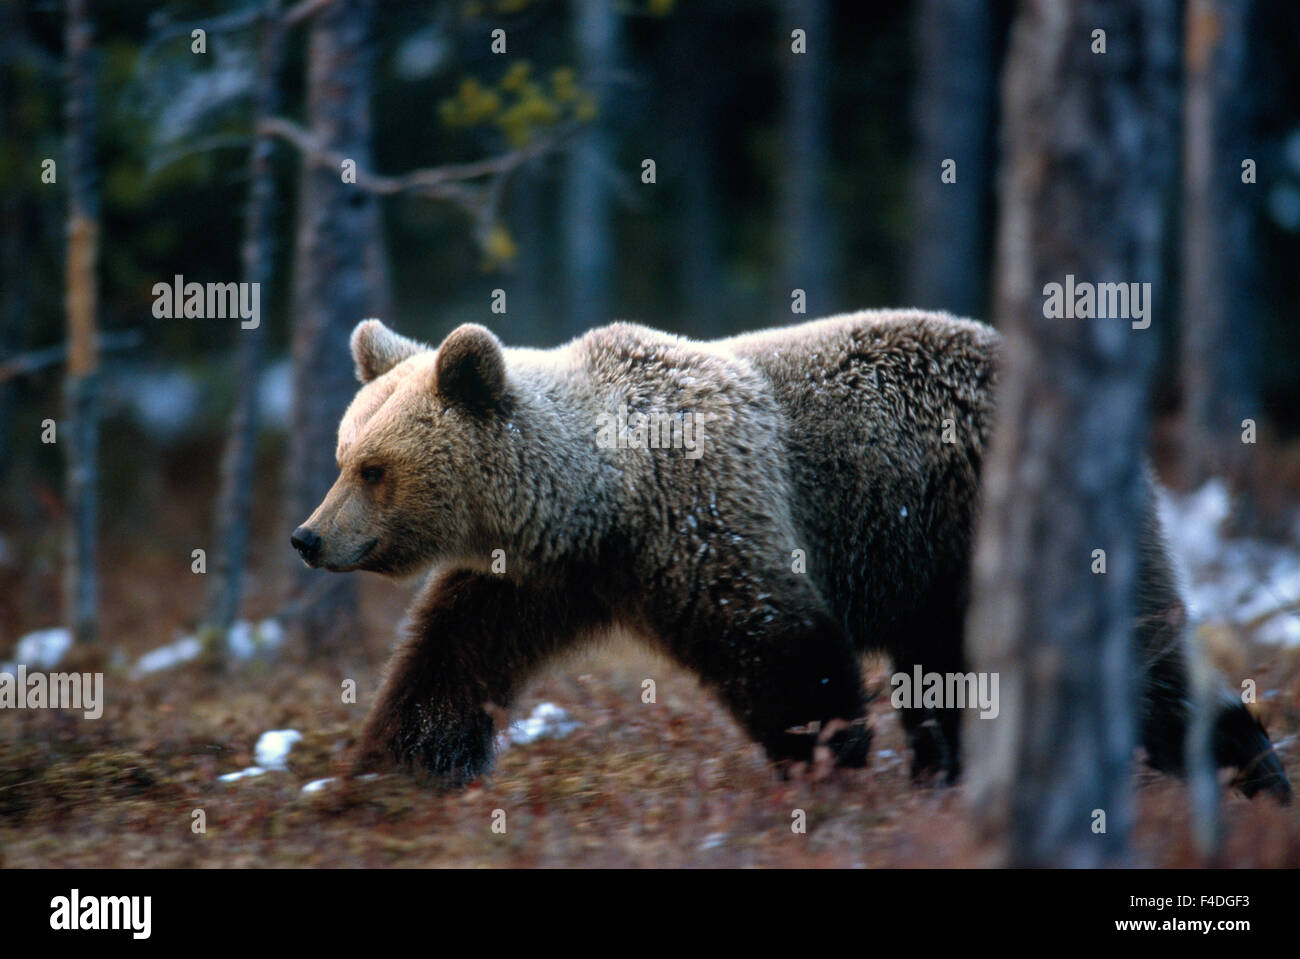 A bear in the forest. Stock Photo